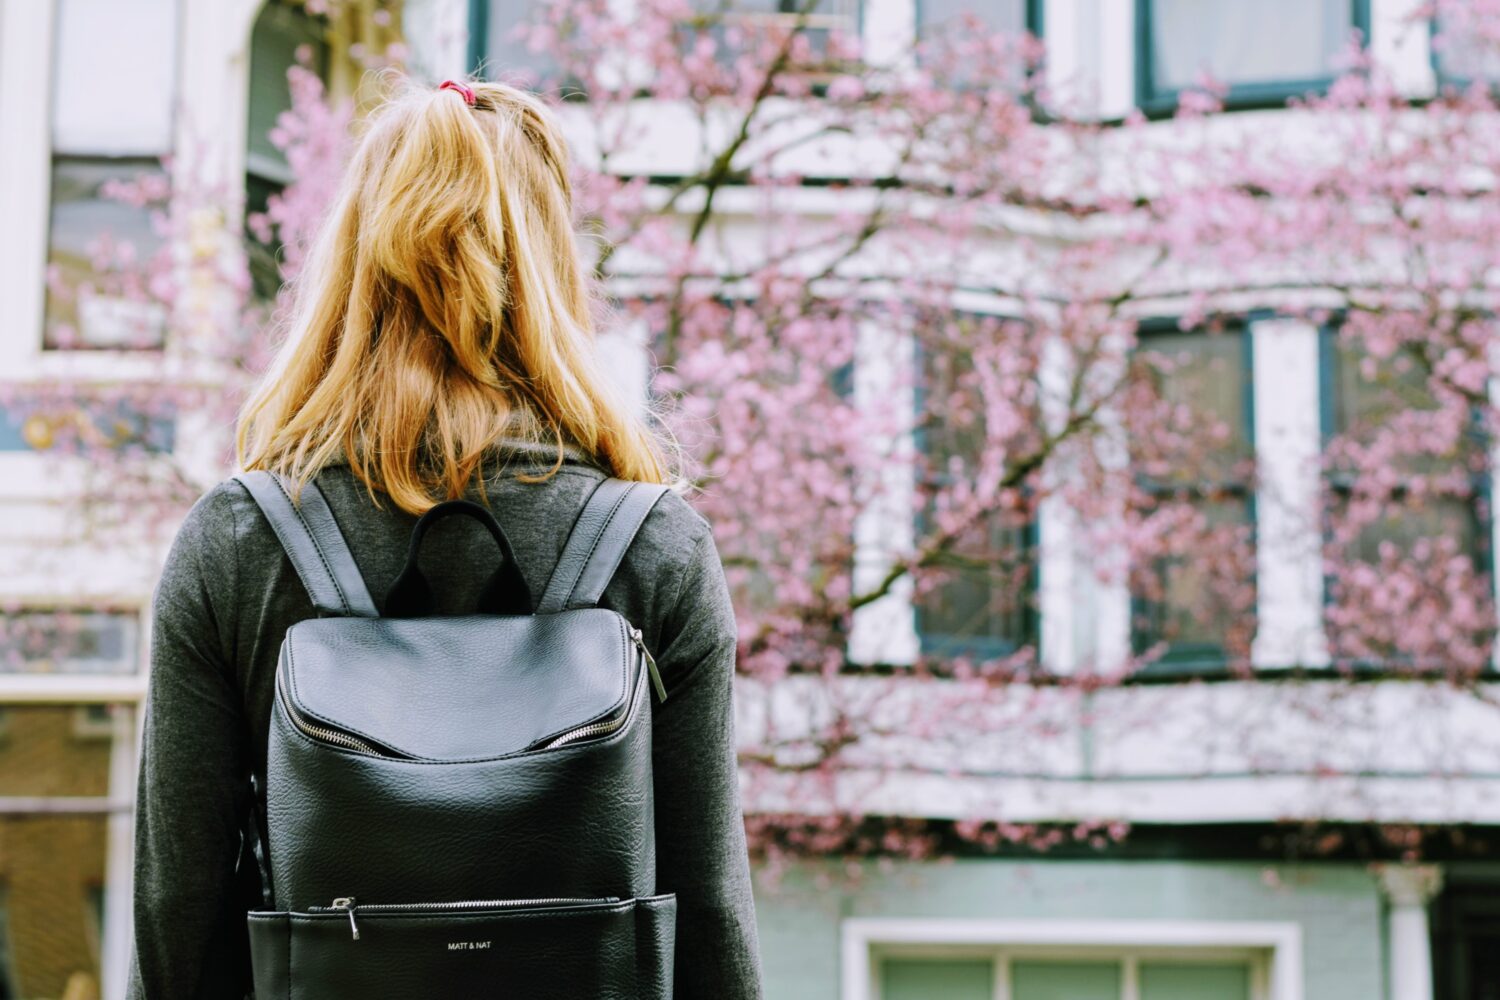 Student wearing a black backpack facing away from the camera.